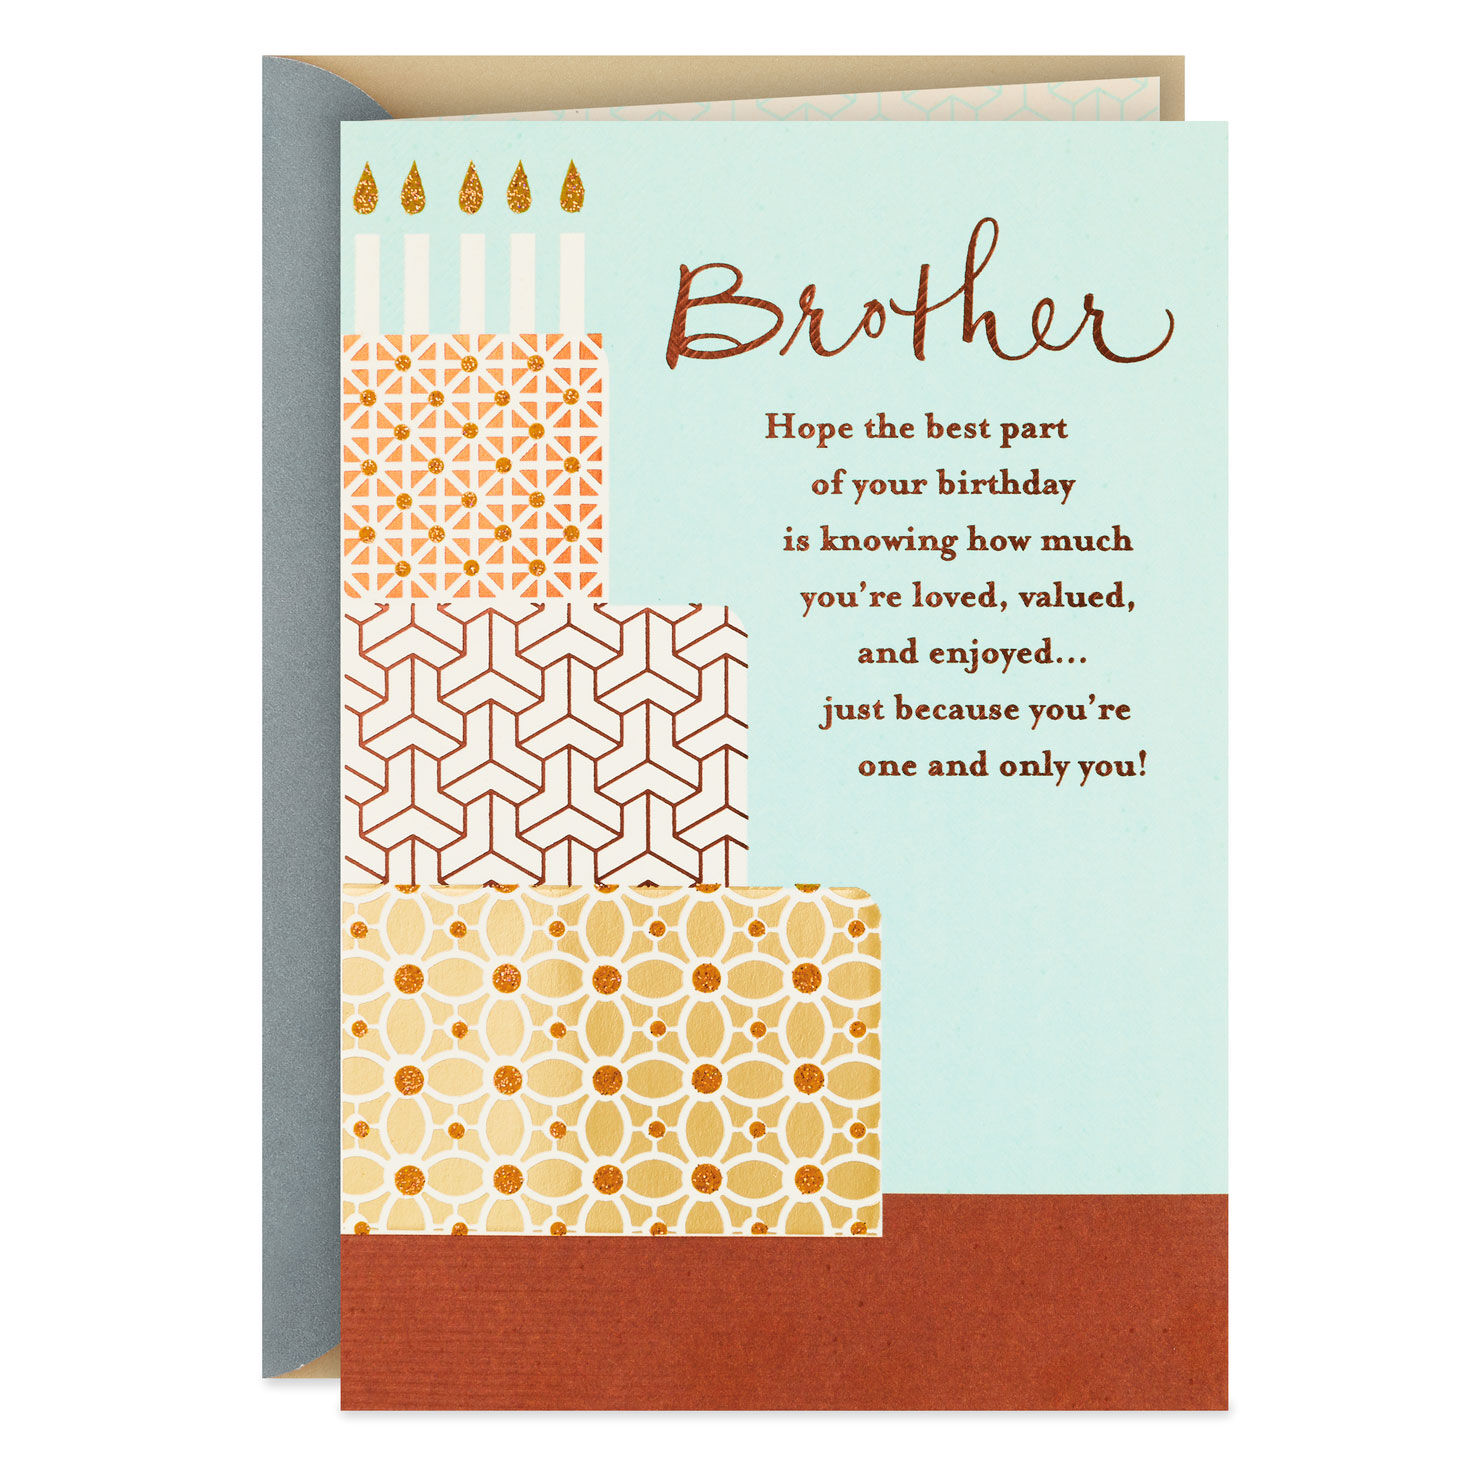 You're a Blessing Religious Birthday Card for Brother for only USD 4.59 | Hallmark